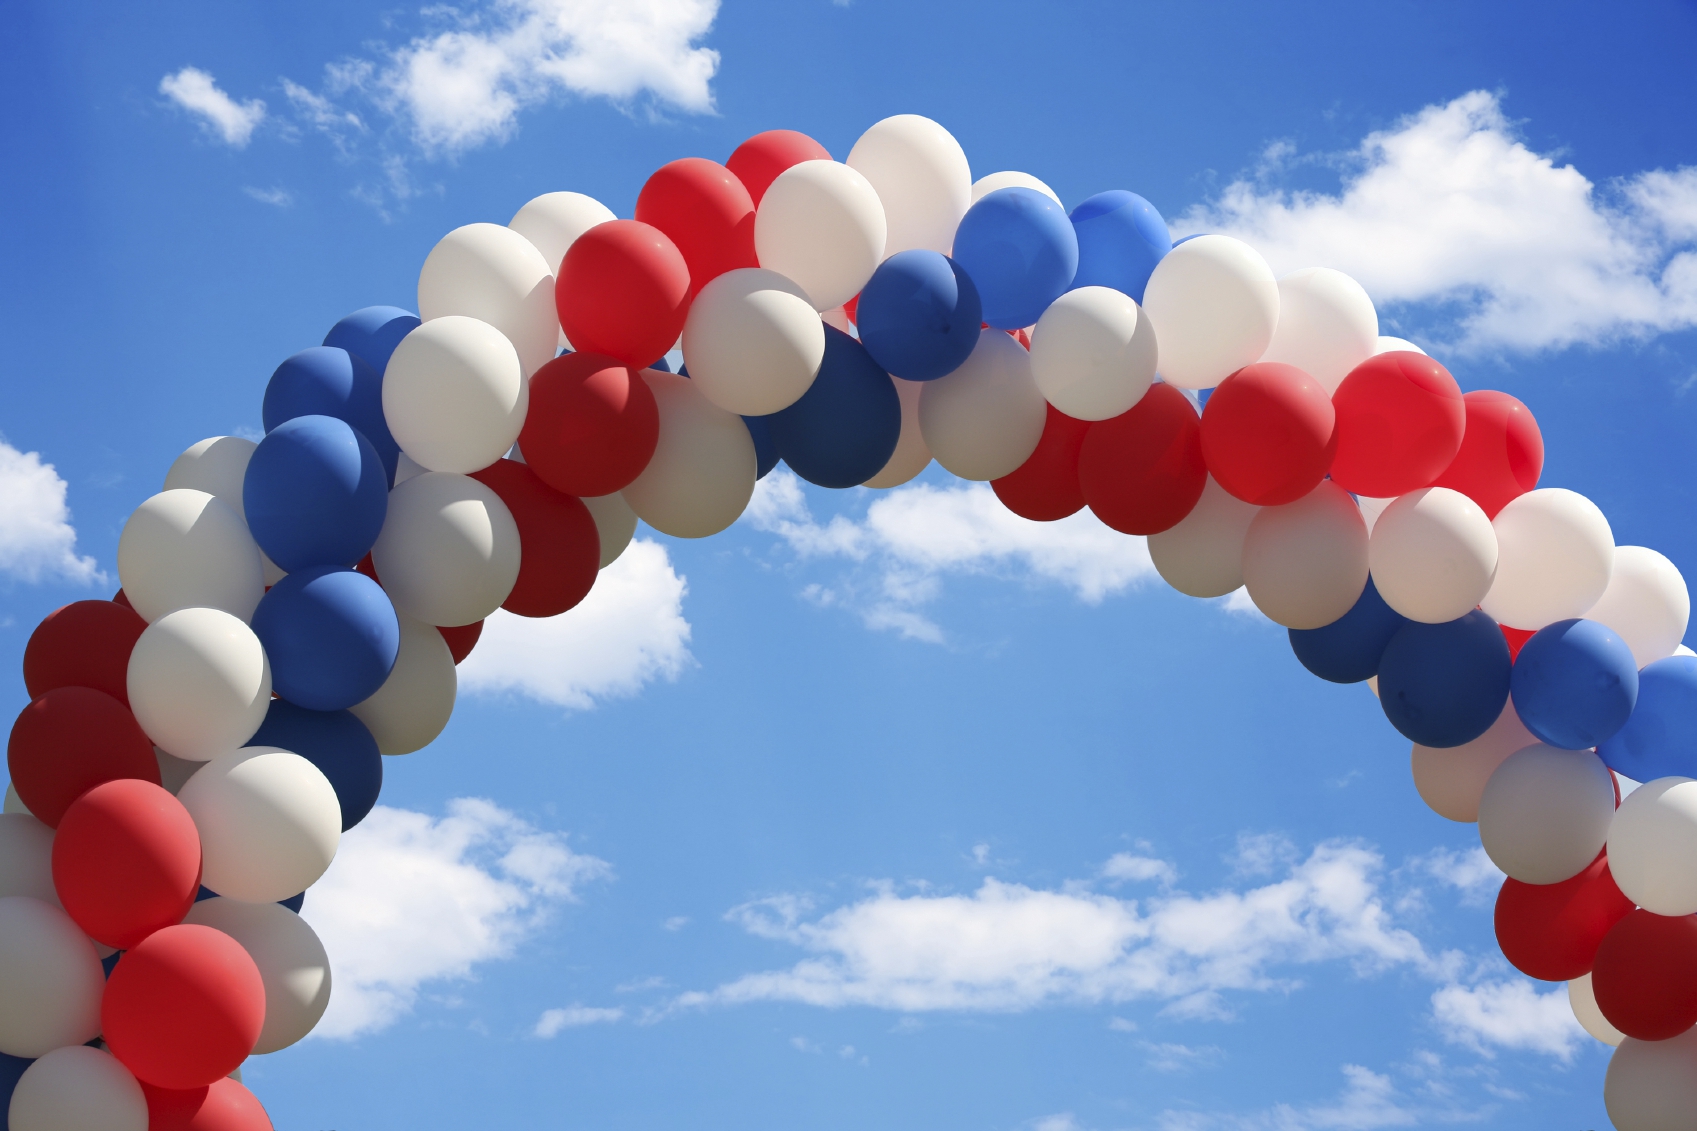 Beautiful blue heavenly and soft cloudy sky with a patriotic balloon arch